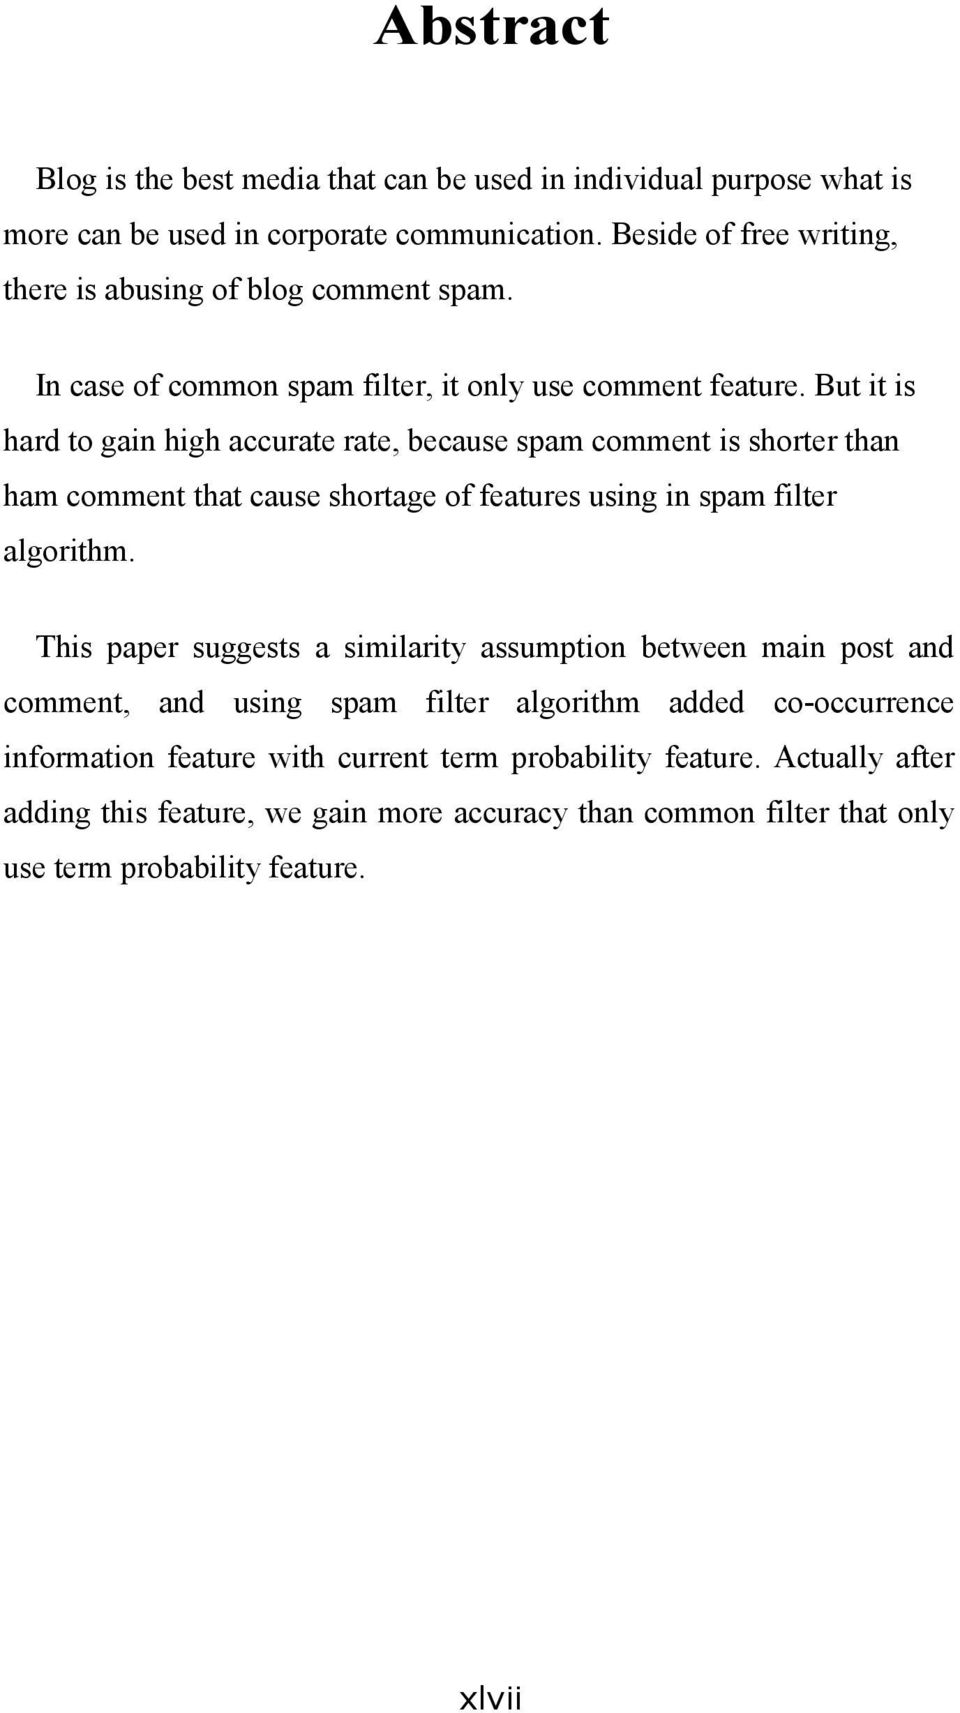 But it is hard to gain high accurate rate, because spam comment is shorter than ham comment that cause shortage of features using in spam filter algorithm.